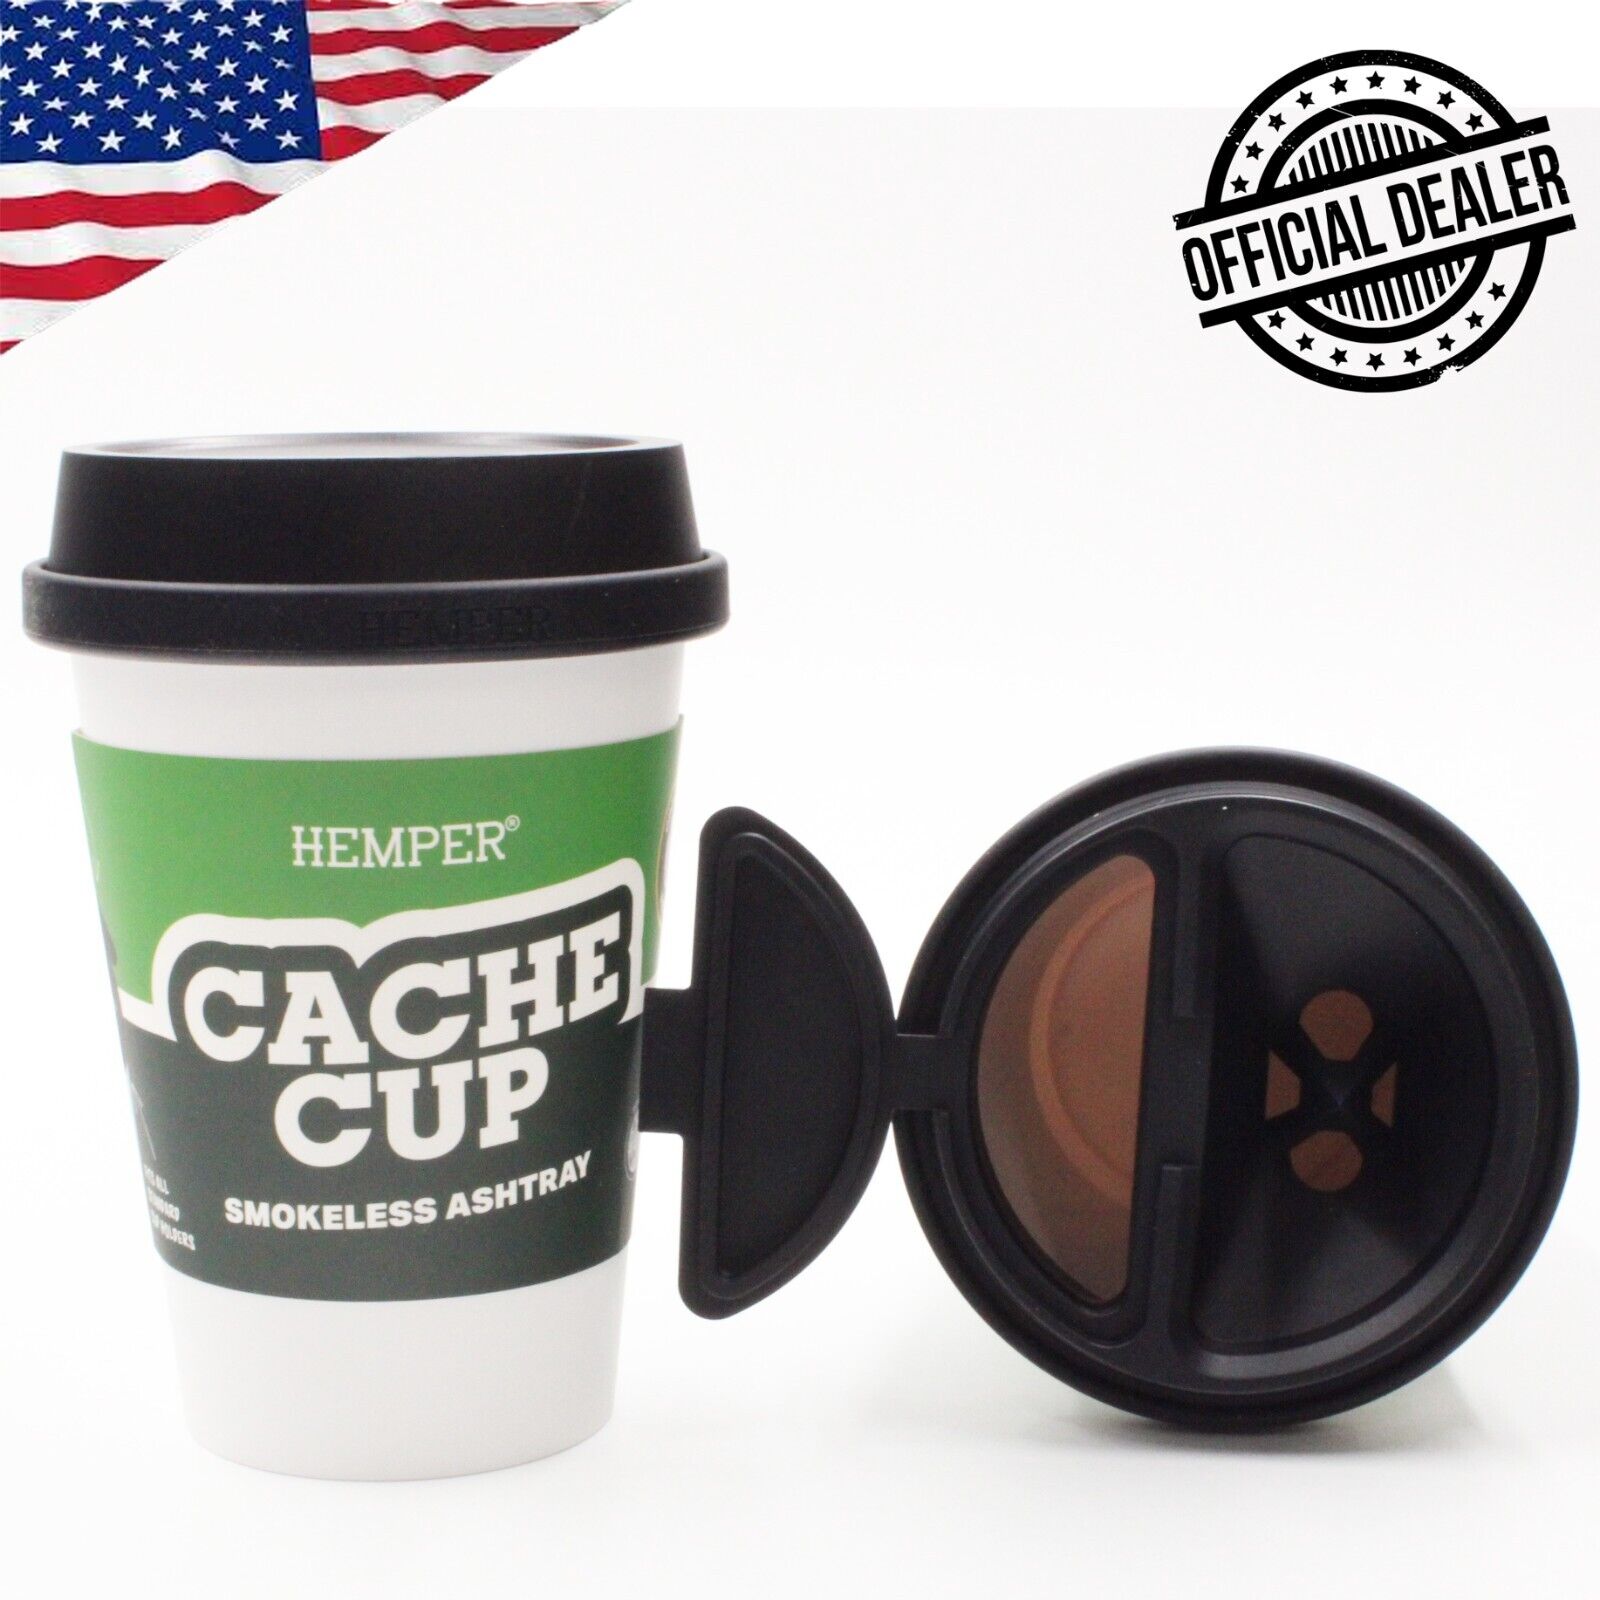 Hemper Coffee Cup Cache Cup Stash Jar ASHTRAY Secret Herb Container Smell Proof